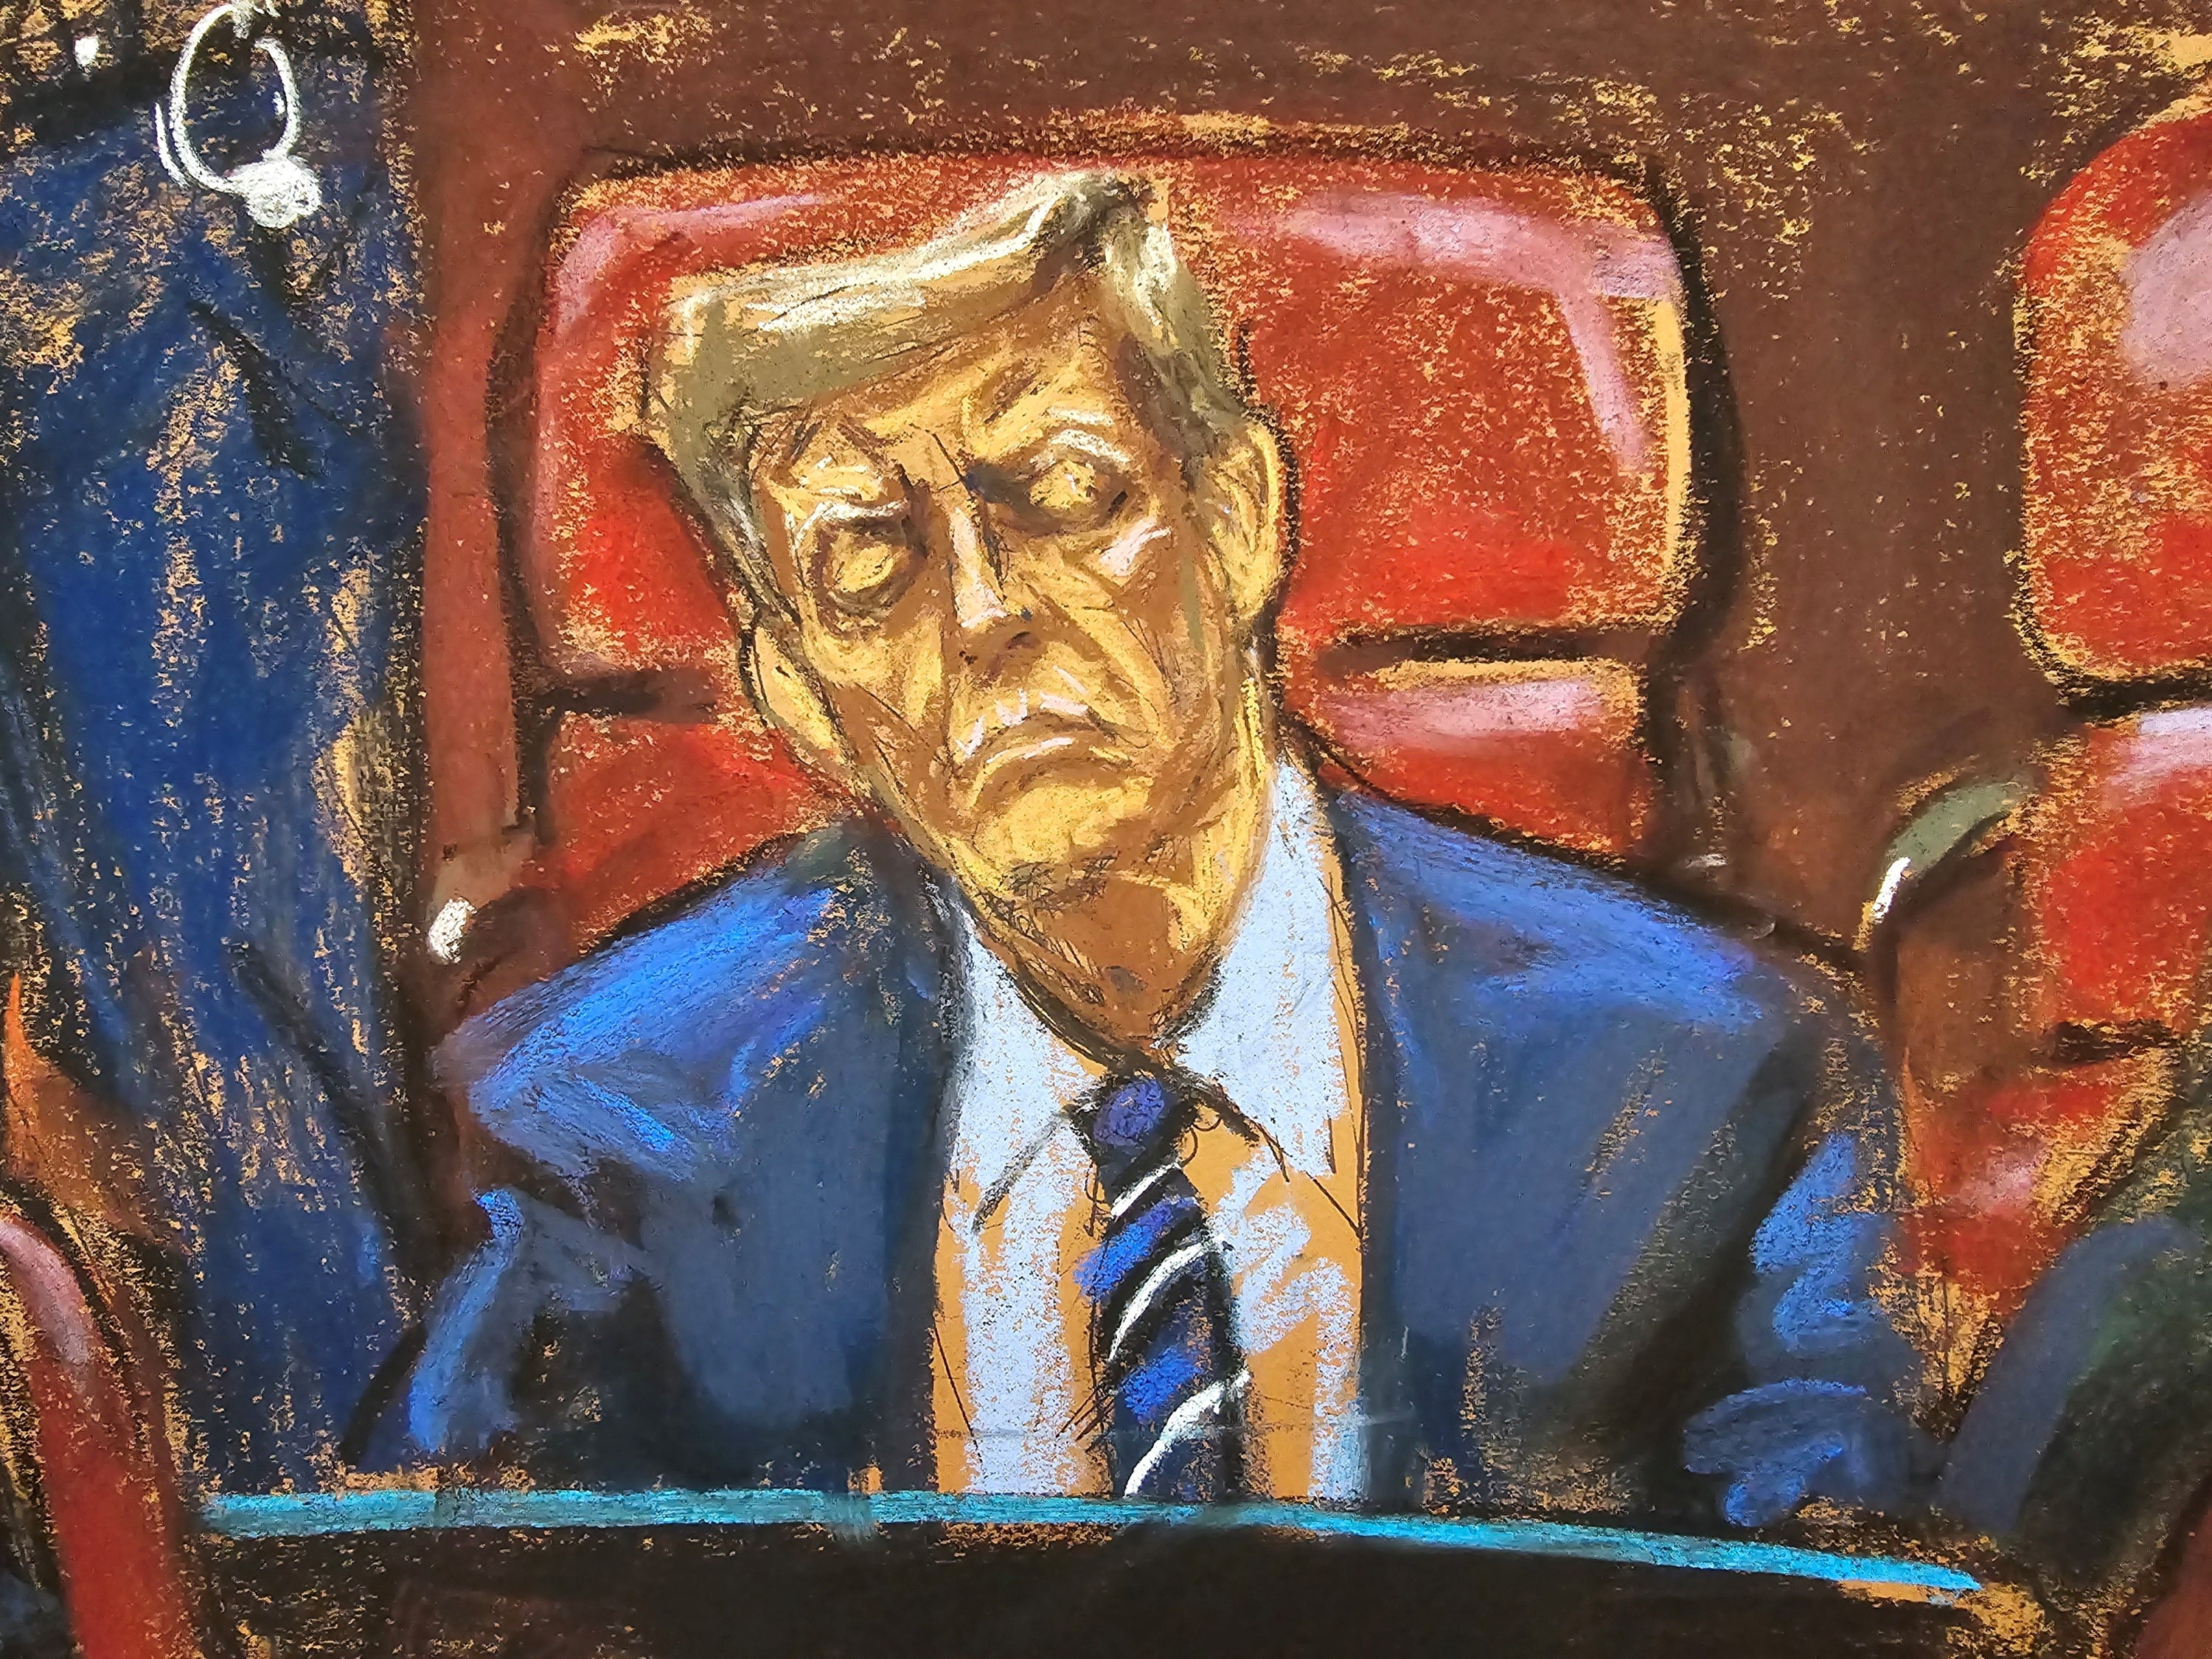 Courtroom sketch that appears to show Mr Trump dosing off